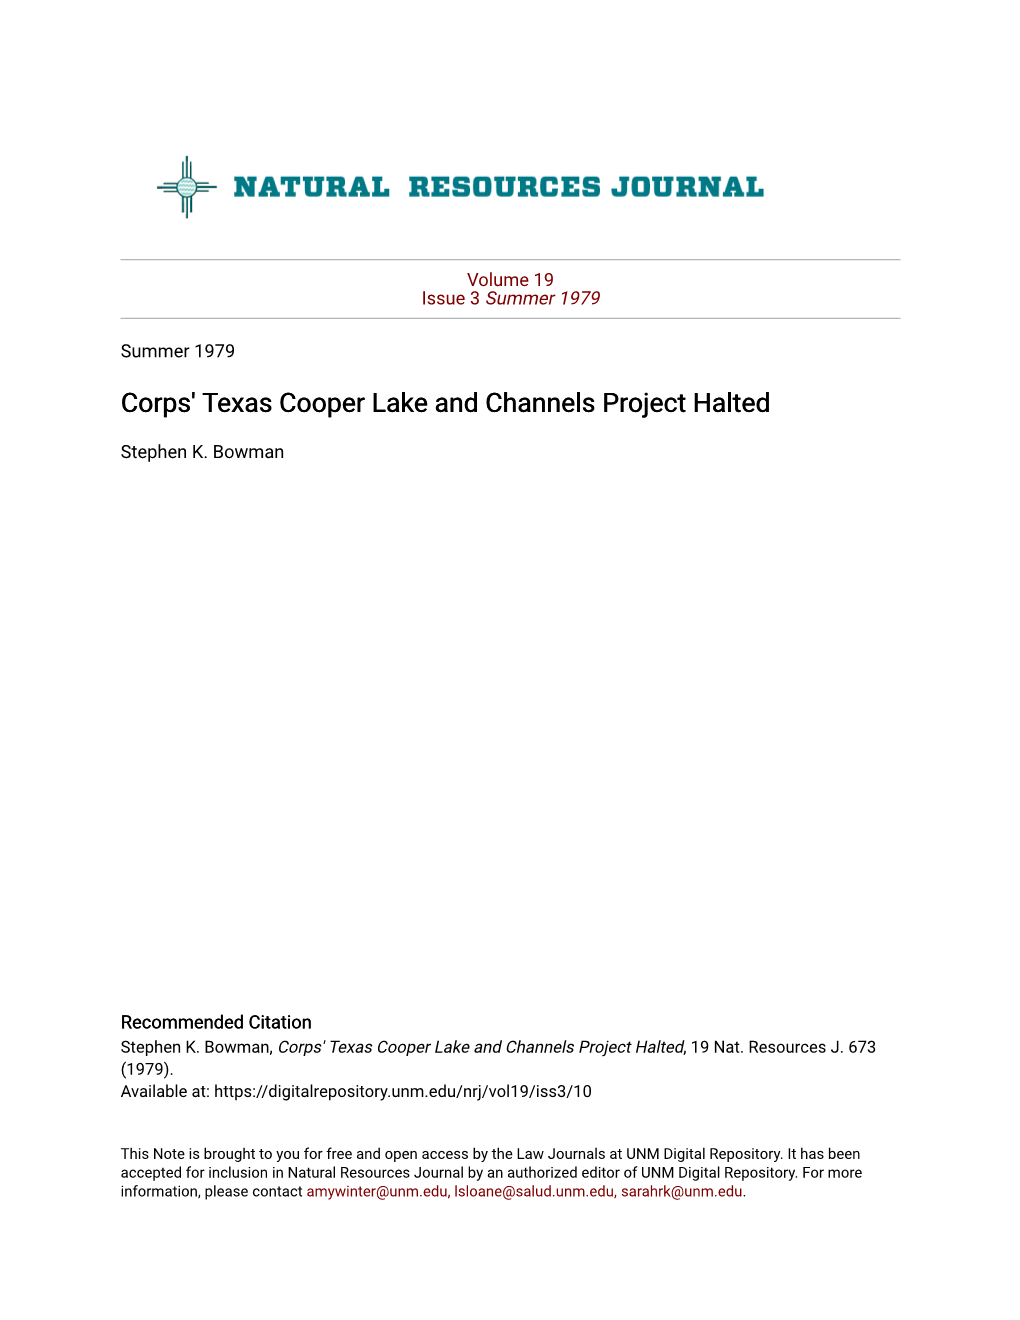 Corps' Texas Cooper Lake and Channels Project Halted